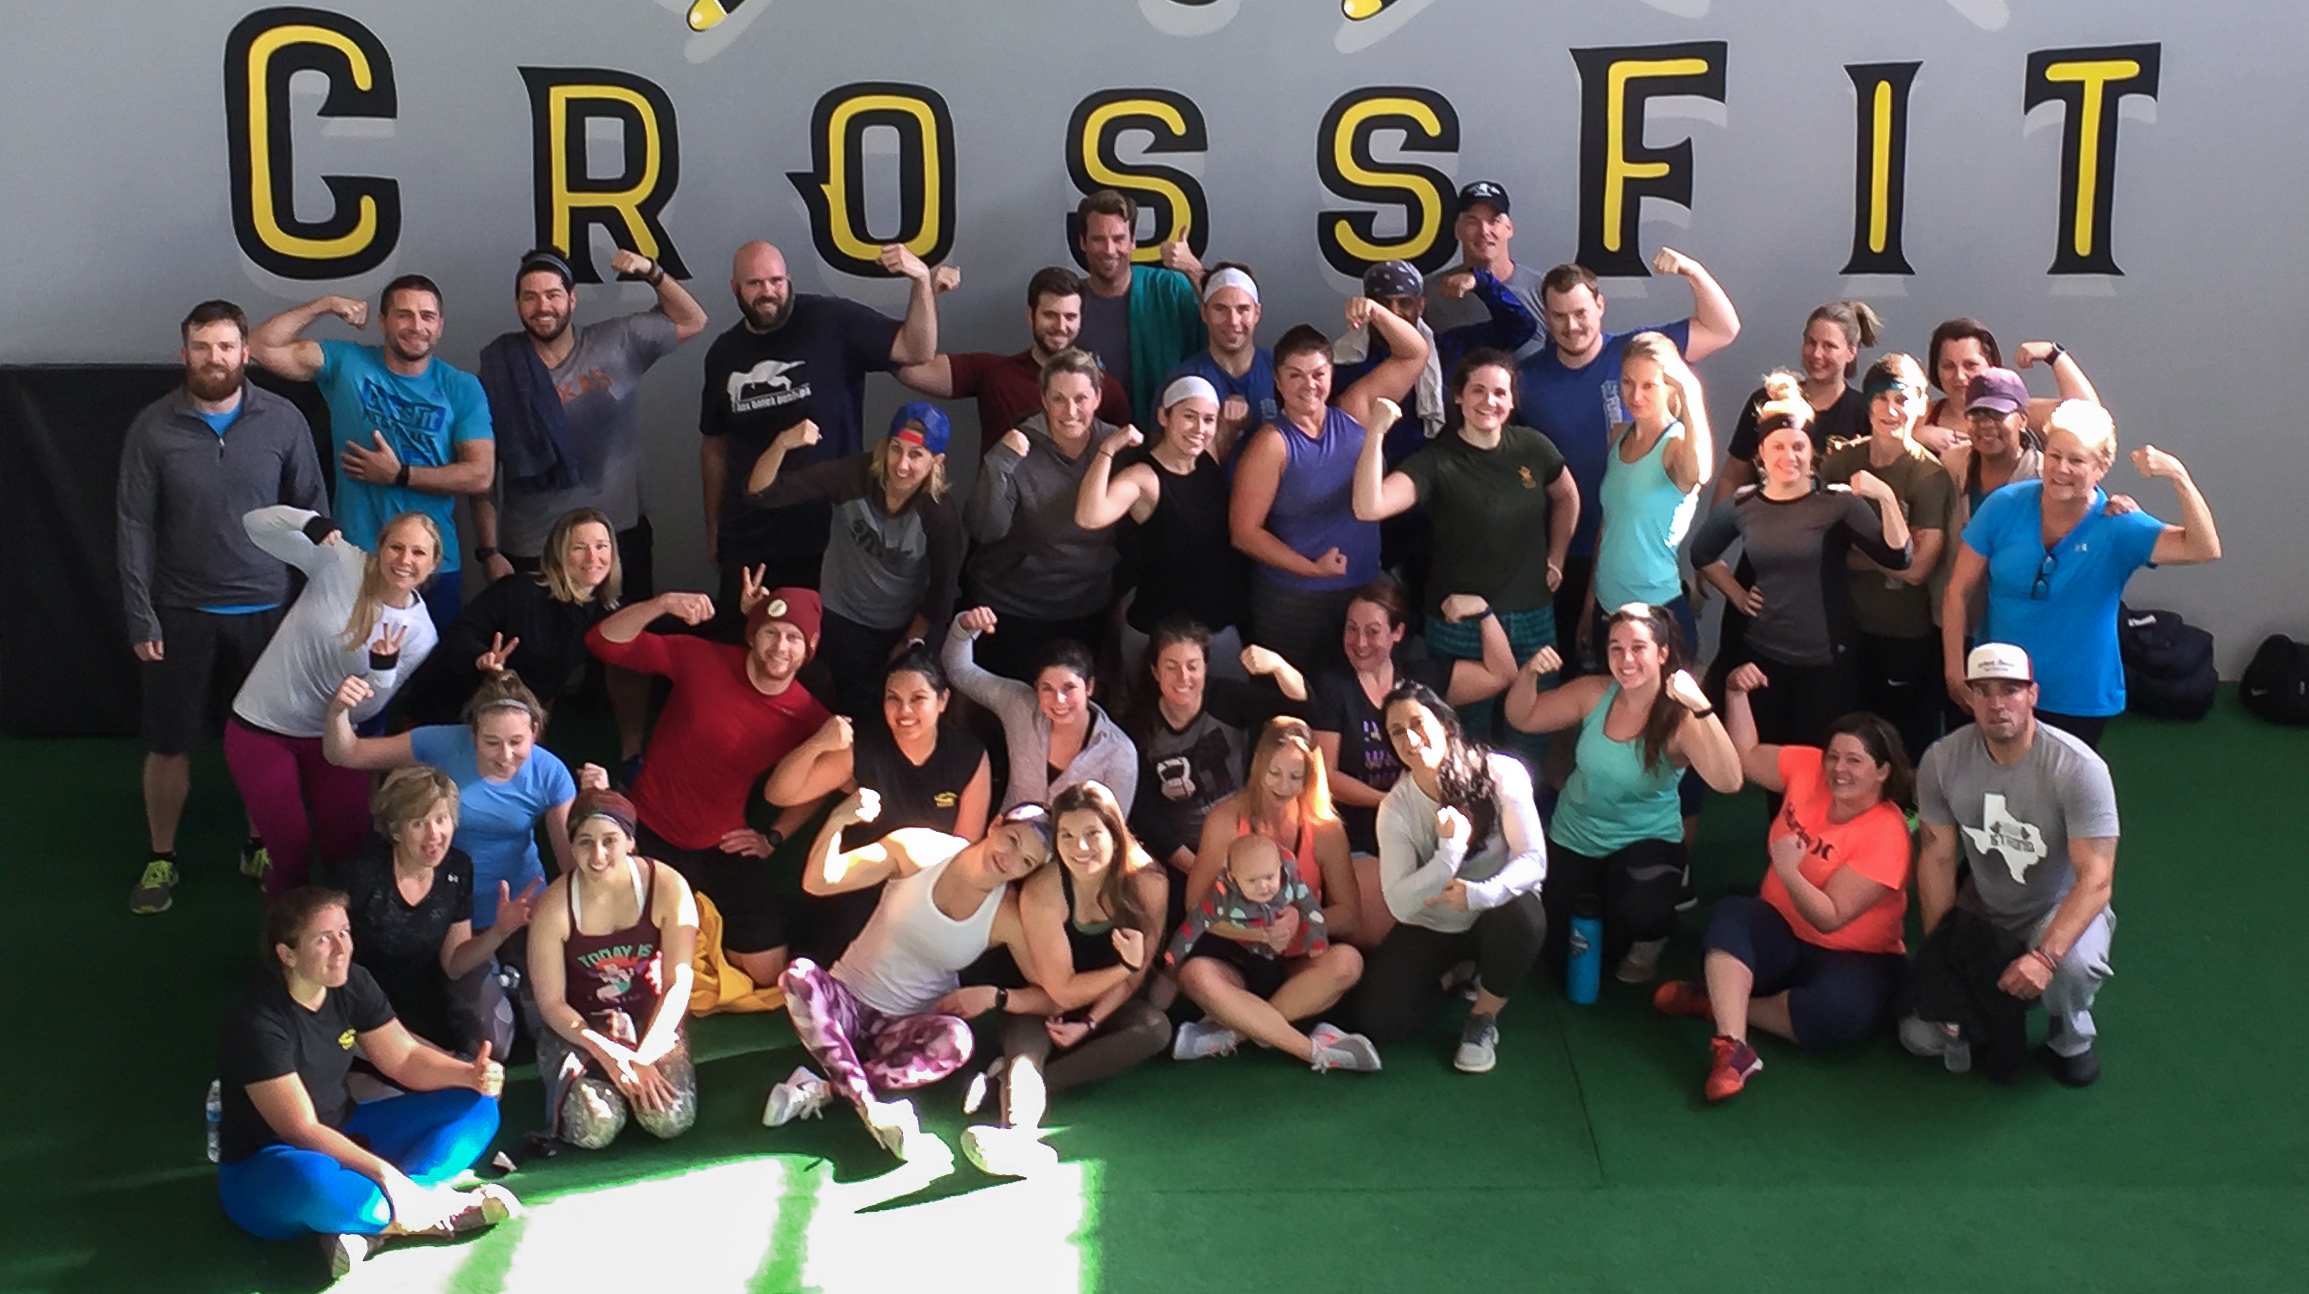 Thanks to everyone who came to our January Community WOD!